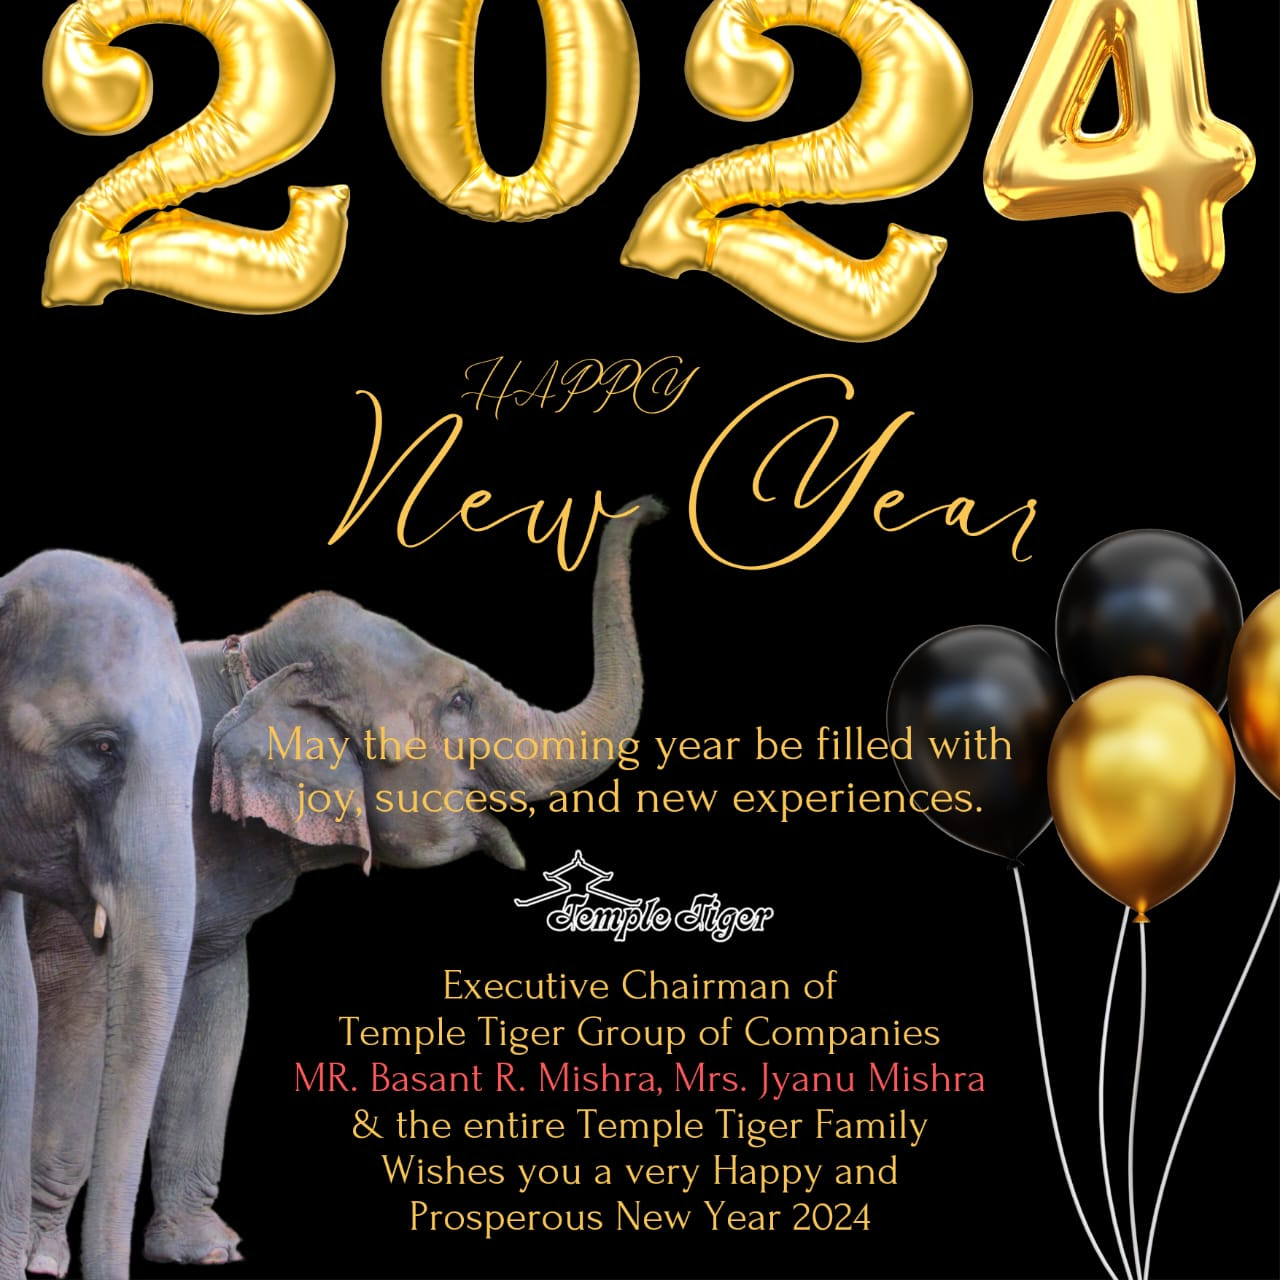 Cheers to a Year of Possibilities: Happy New Year 2024